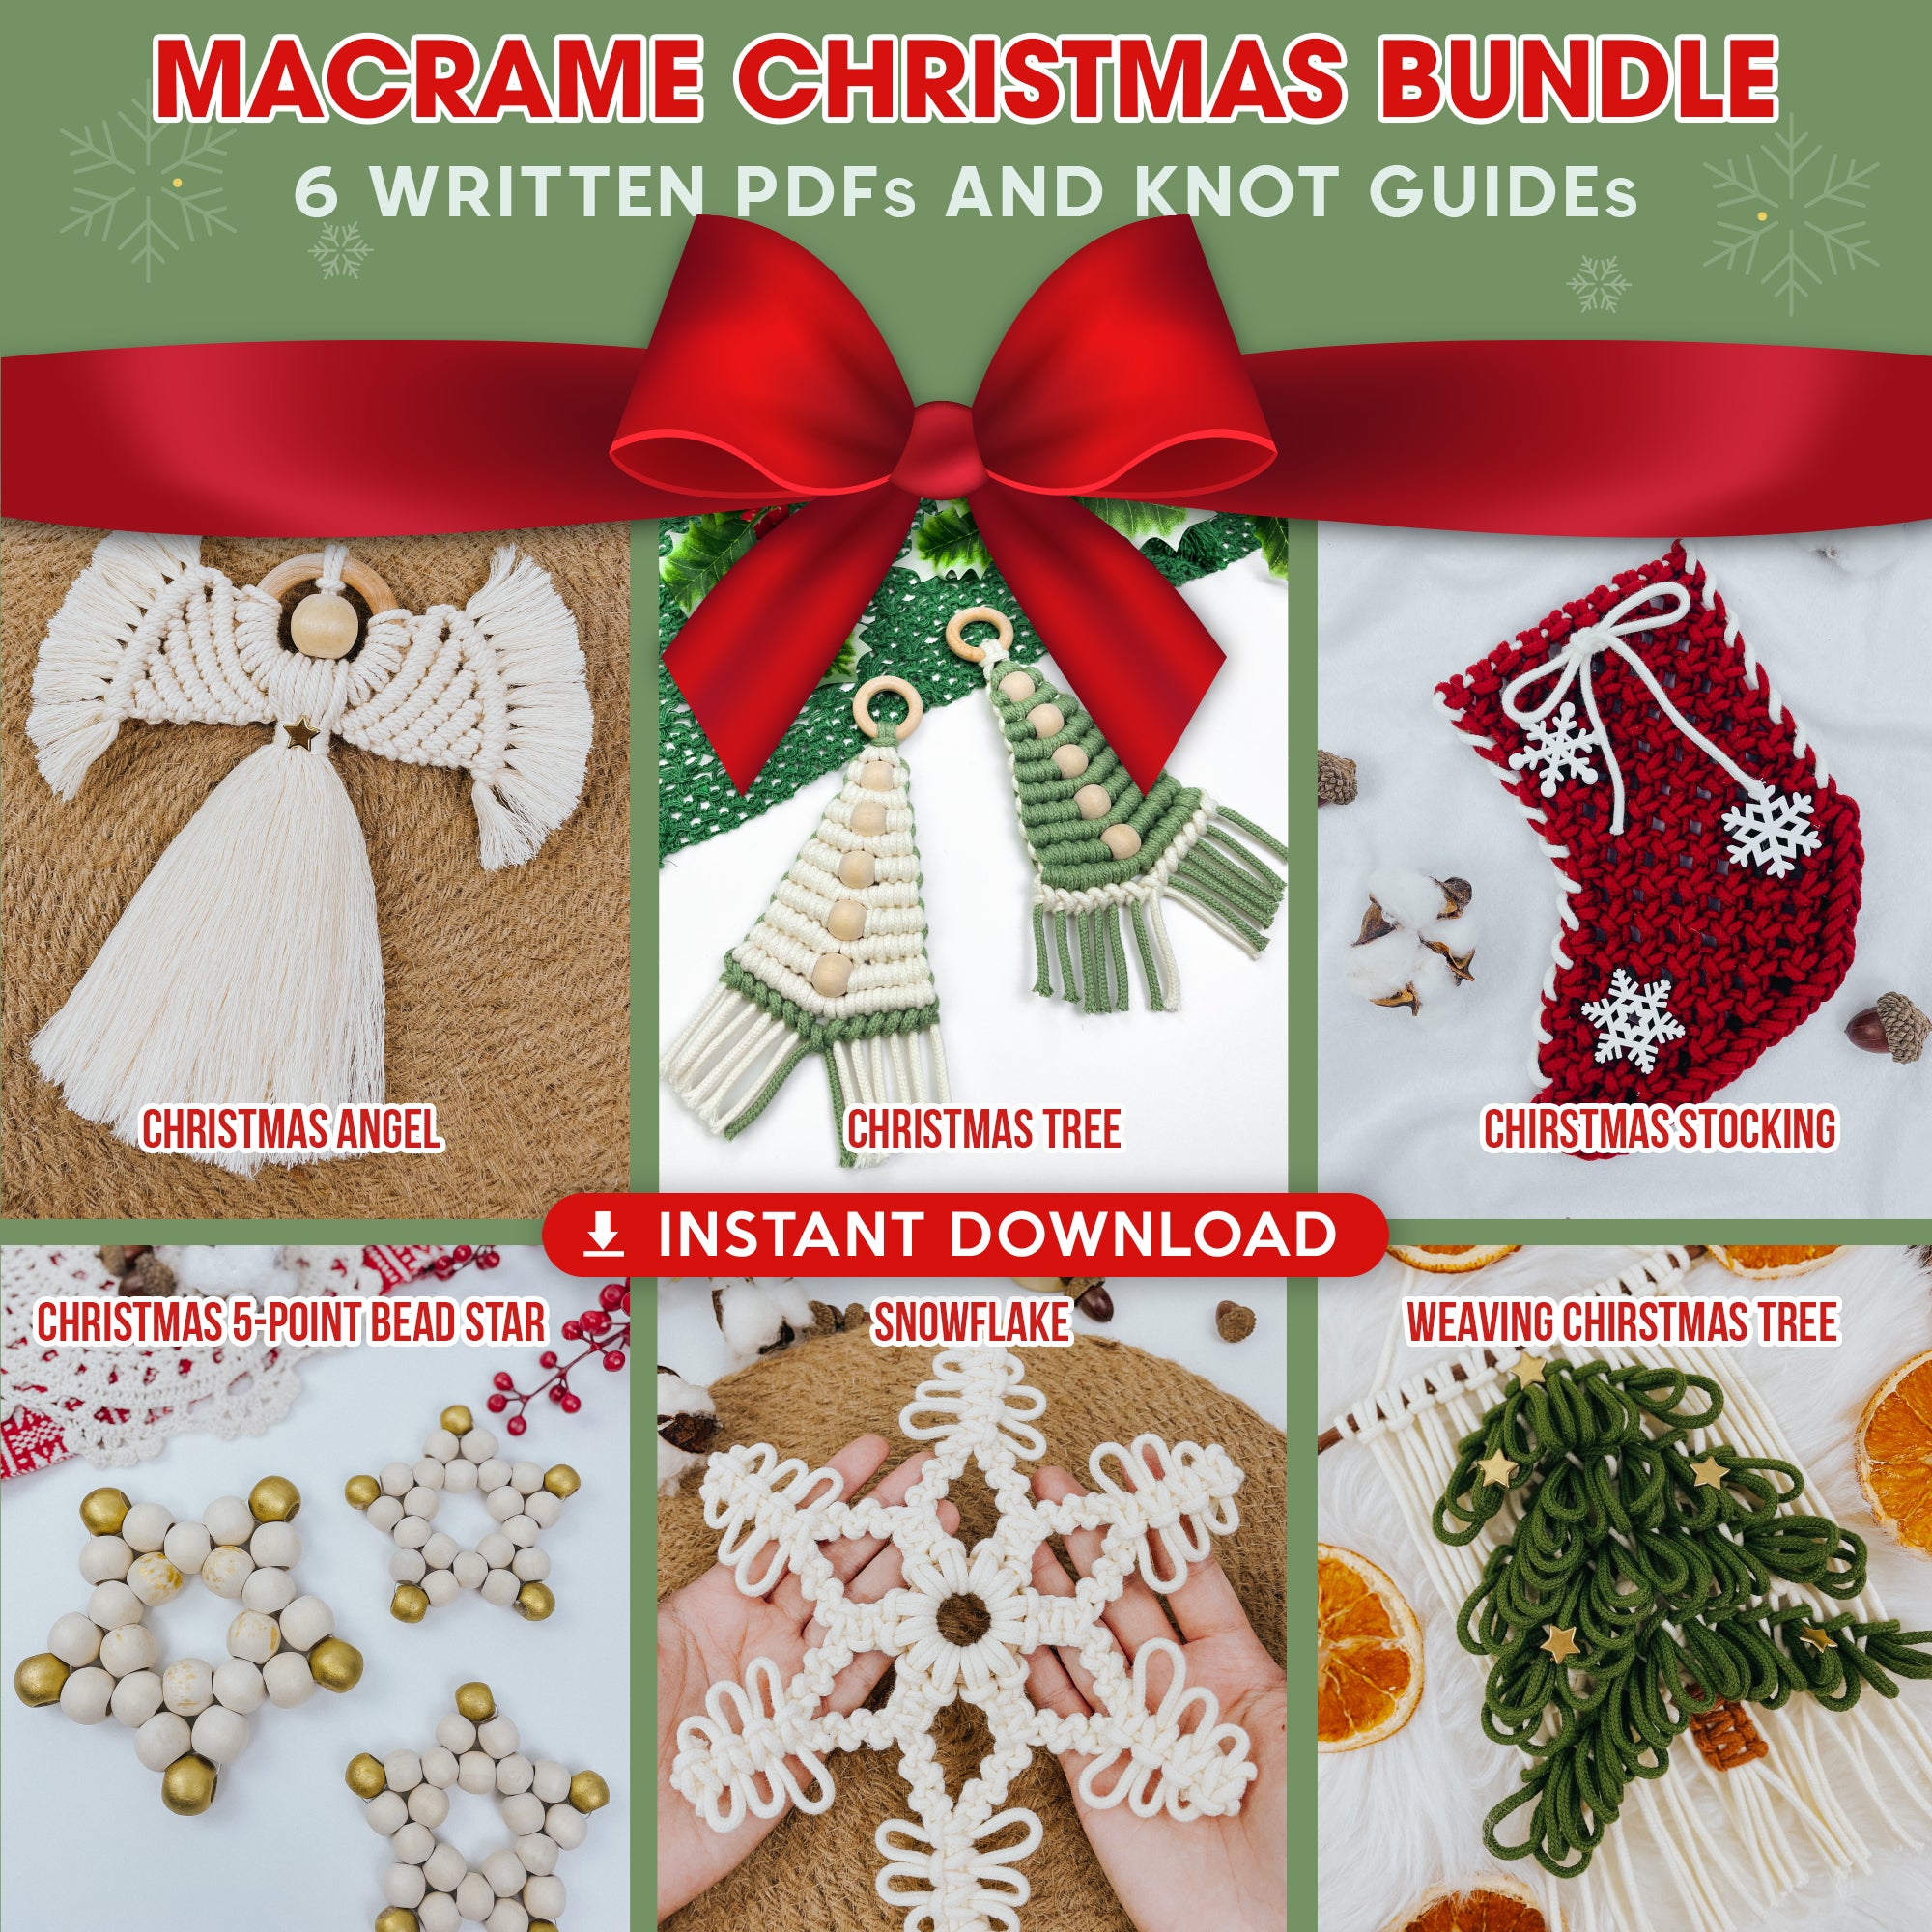 Macrame Christmas Bundle - 6 Digital PDFs and Knot Guides